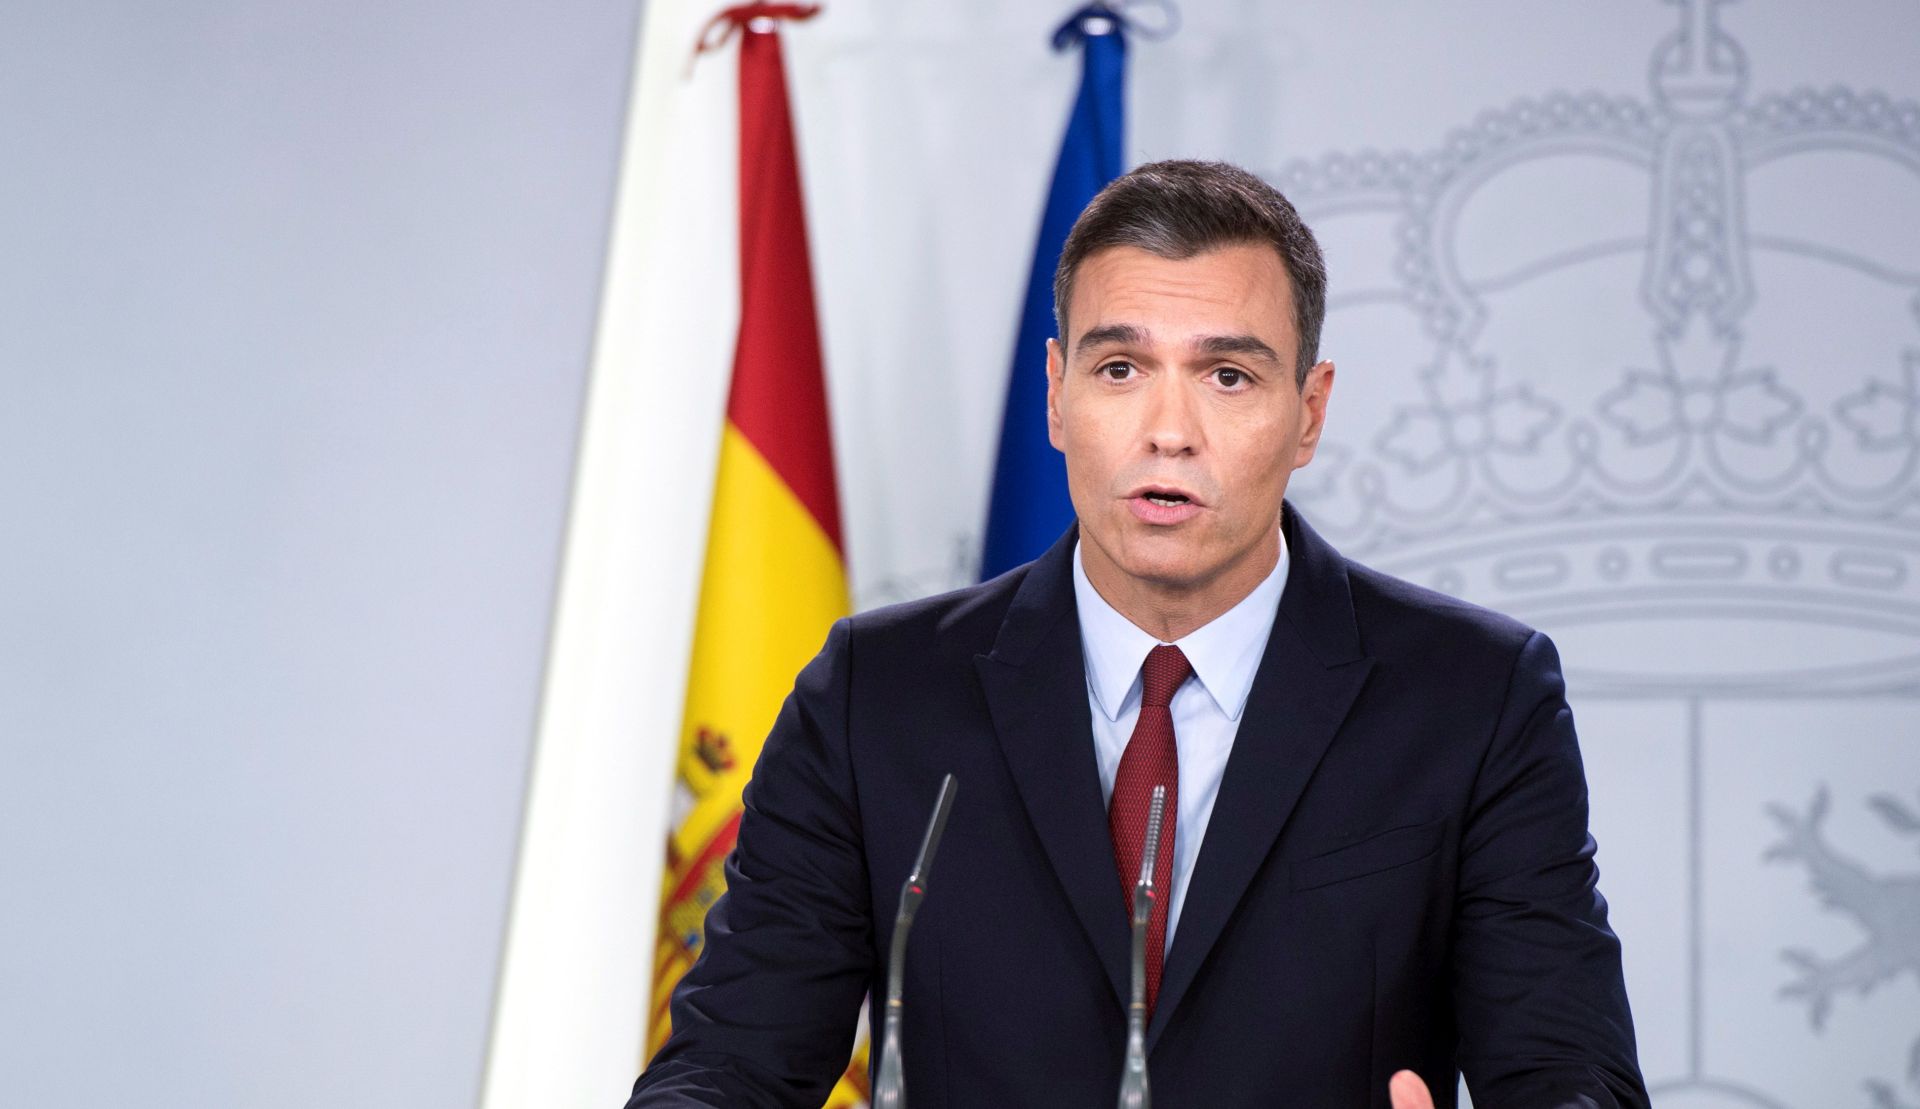 epa07945675 Spanish acting Prime Minister Pedro Sanchez attends a press conference after the exhumation of late dictator Francisco Franco from Valle de los Caidos memorial, at Moncloa Palace in Madrid, Spain, 24 October 2019. Spanish dictator Francisco Franco was exhumed on 24 October 2019, a year after the Government started the administrative procedures to remove Franco's remains from the El Valle de los Caidos memorial. Franco’s remains are taken to Mingorrubio cemetery following Supreme Court orders. Franco has been buried at the El Valle de los Caidos memorial since his death in 1975.  EPA/Luca Piergiovanni